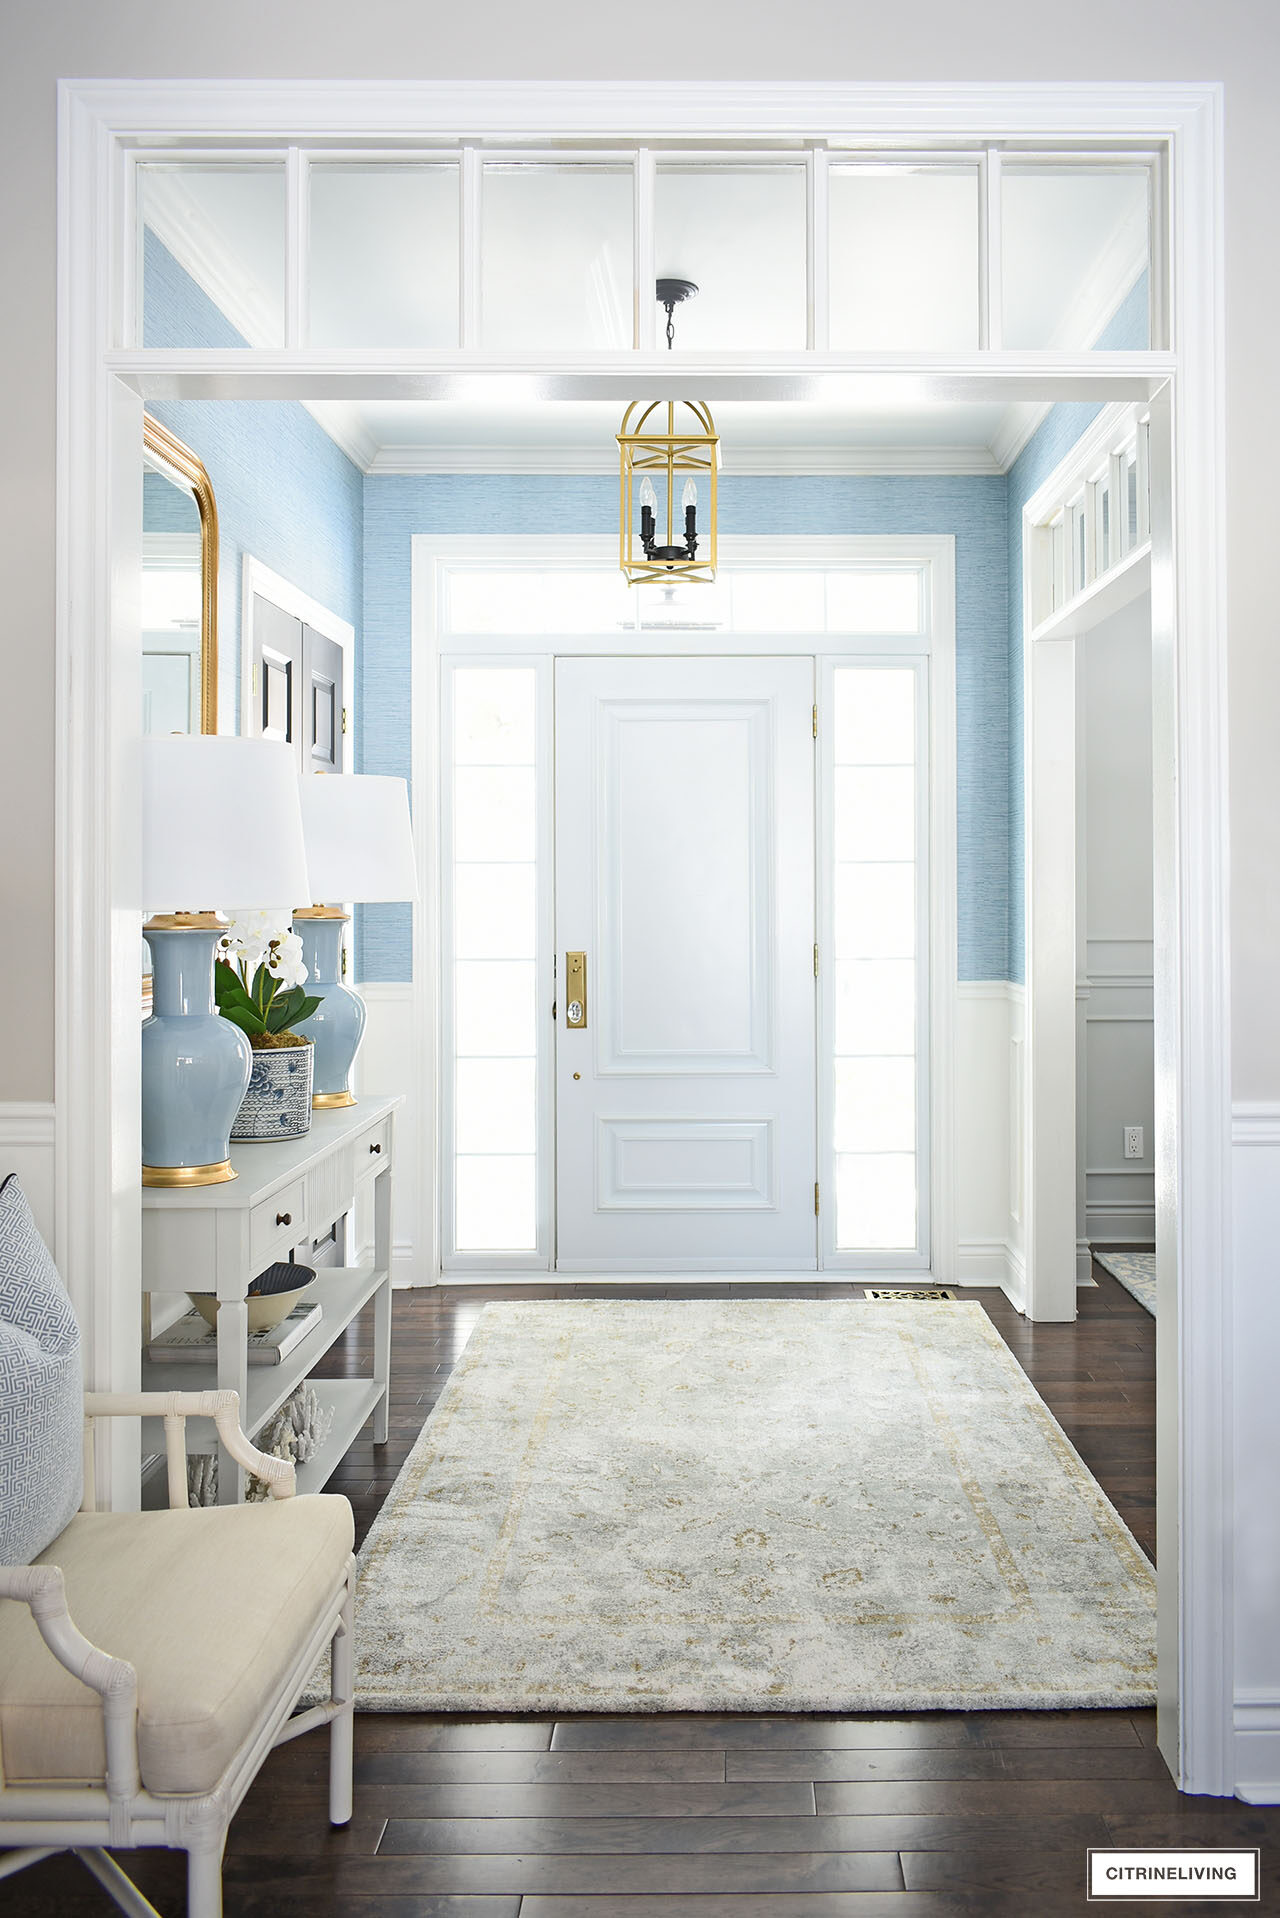 Entryway decorated for spring with blue lamps, gold mirror and a soft muted rug